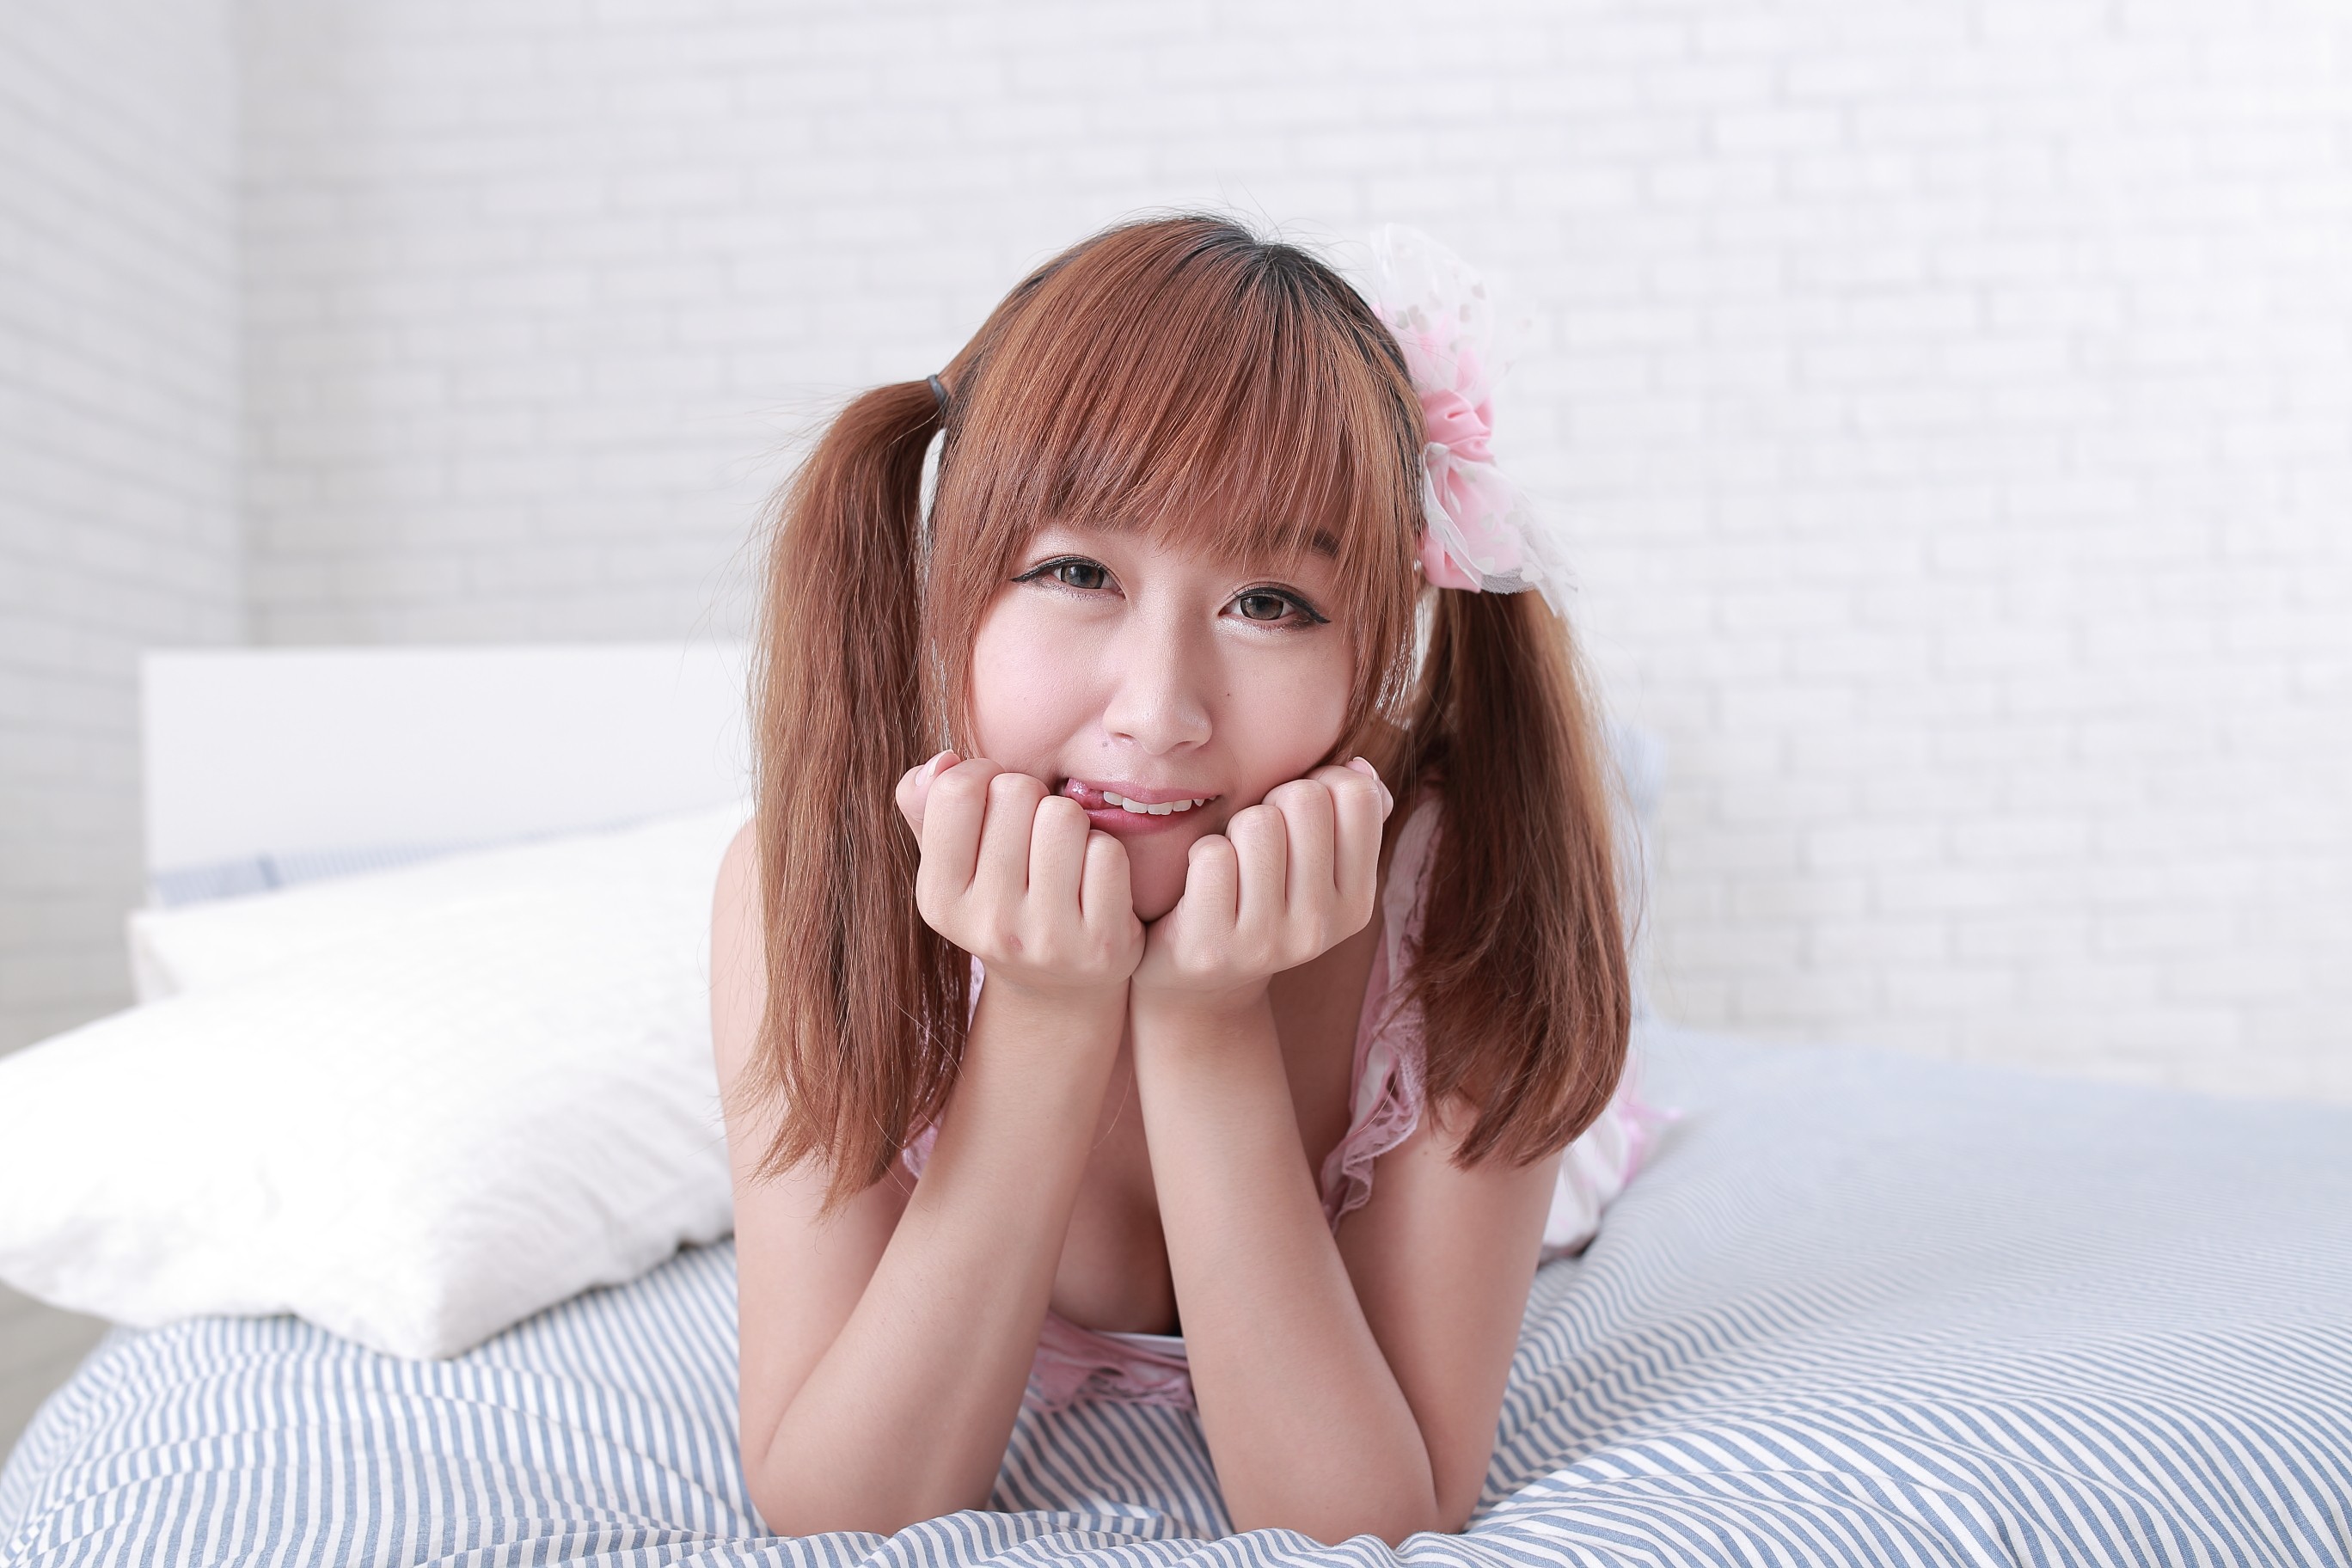 Redhead Auburn Hair In Bed Pigtails Twintails Knot Brown Eyes Licking Lips 2736x1824